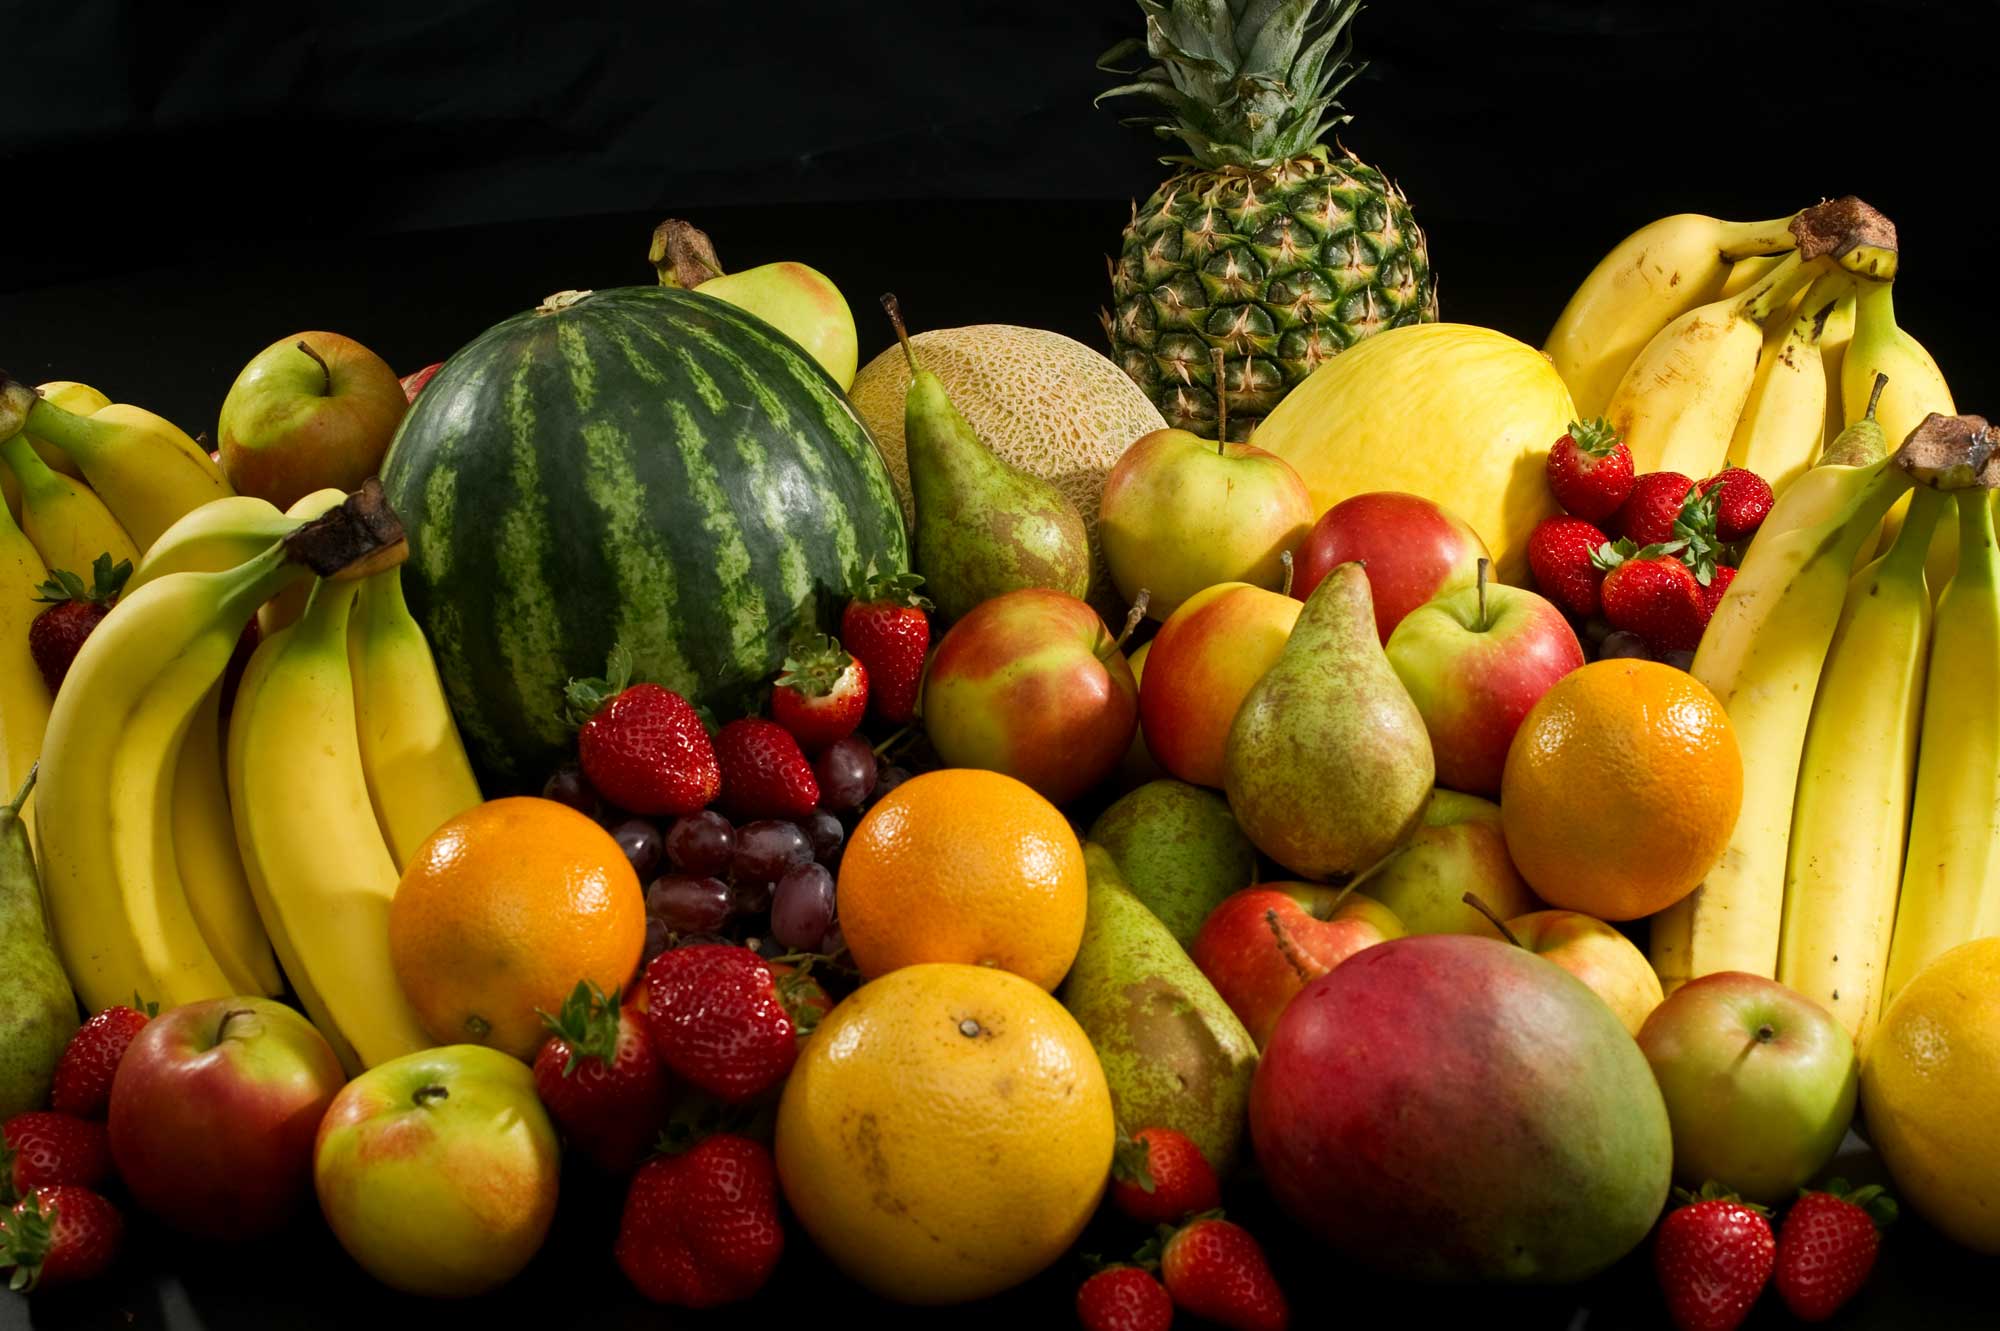 Fruit retain your good health and proper weight